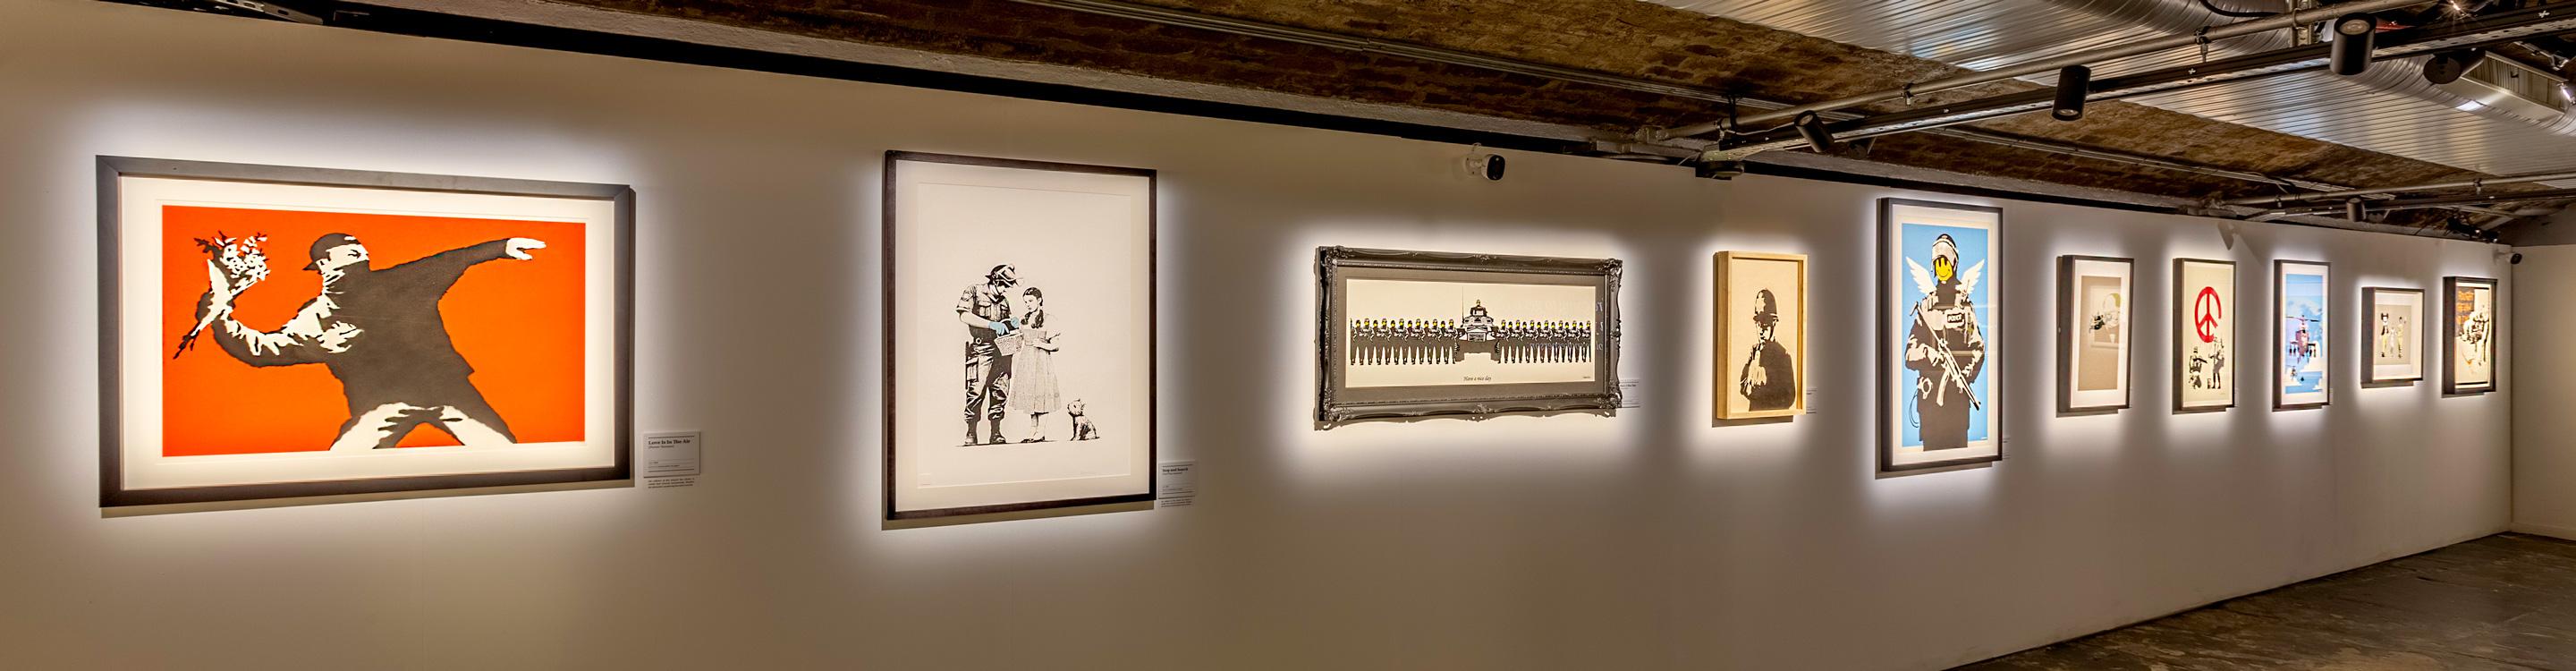 Photograph of works on display  the Art of Banksy Unauthorised exhibition in London